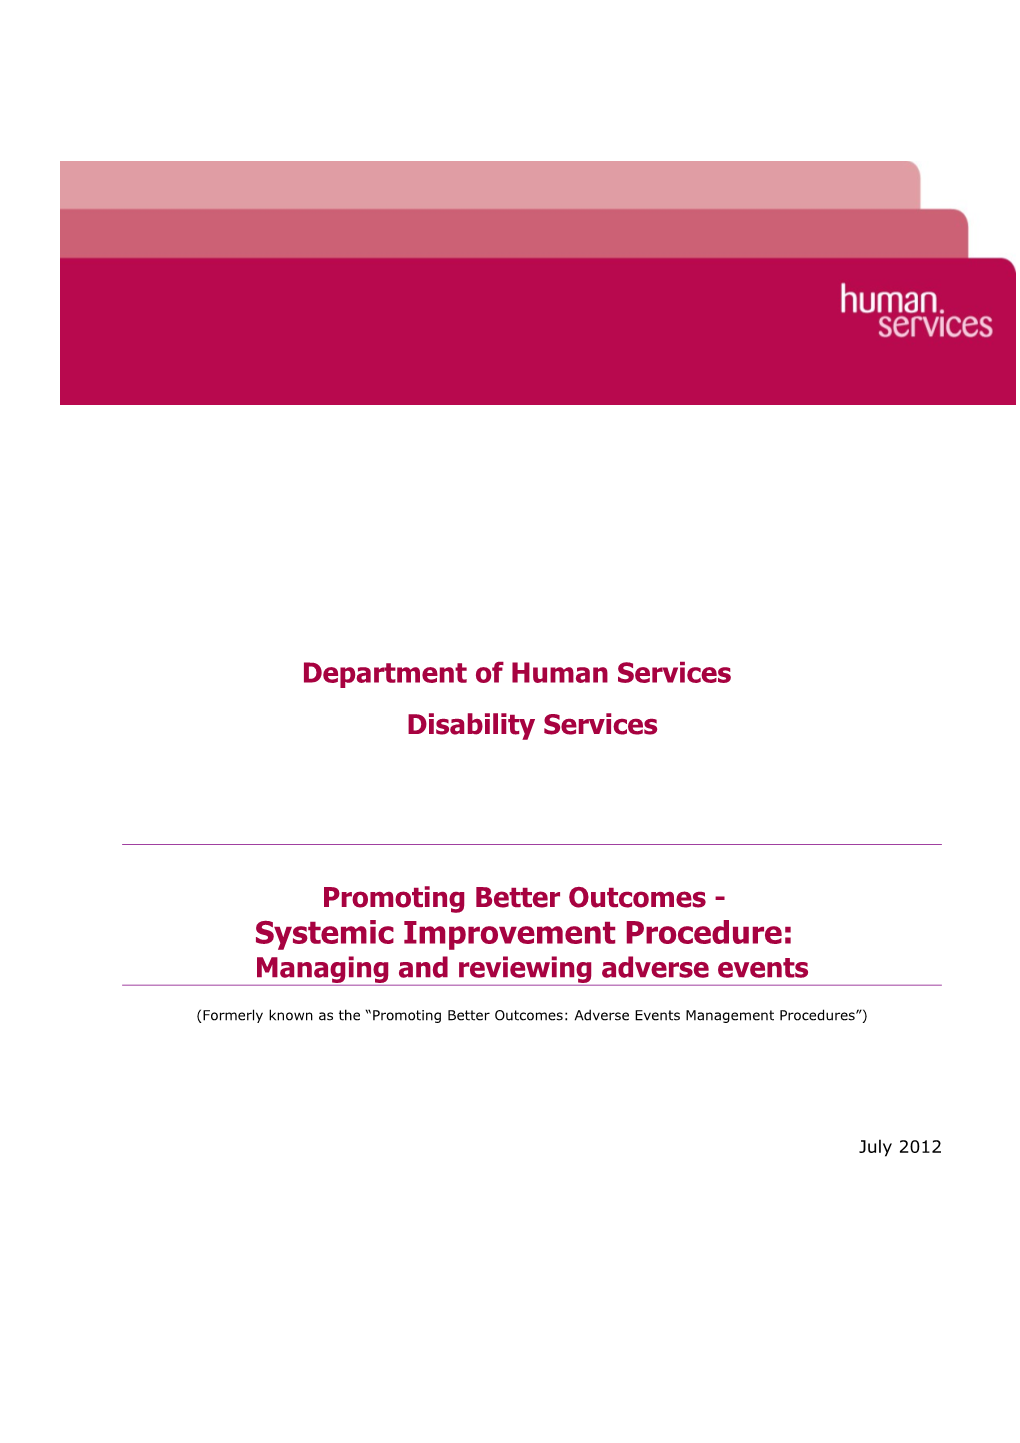 Promoting Better Outcomes - Systemic Improvement Procedures: Managing and Reviewing Adverse